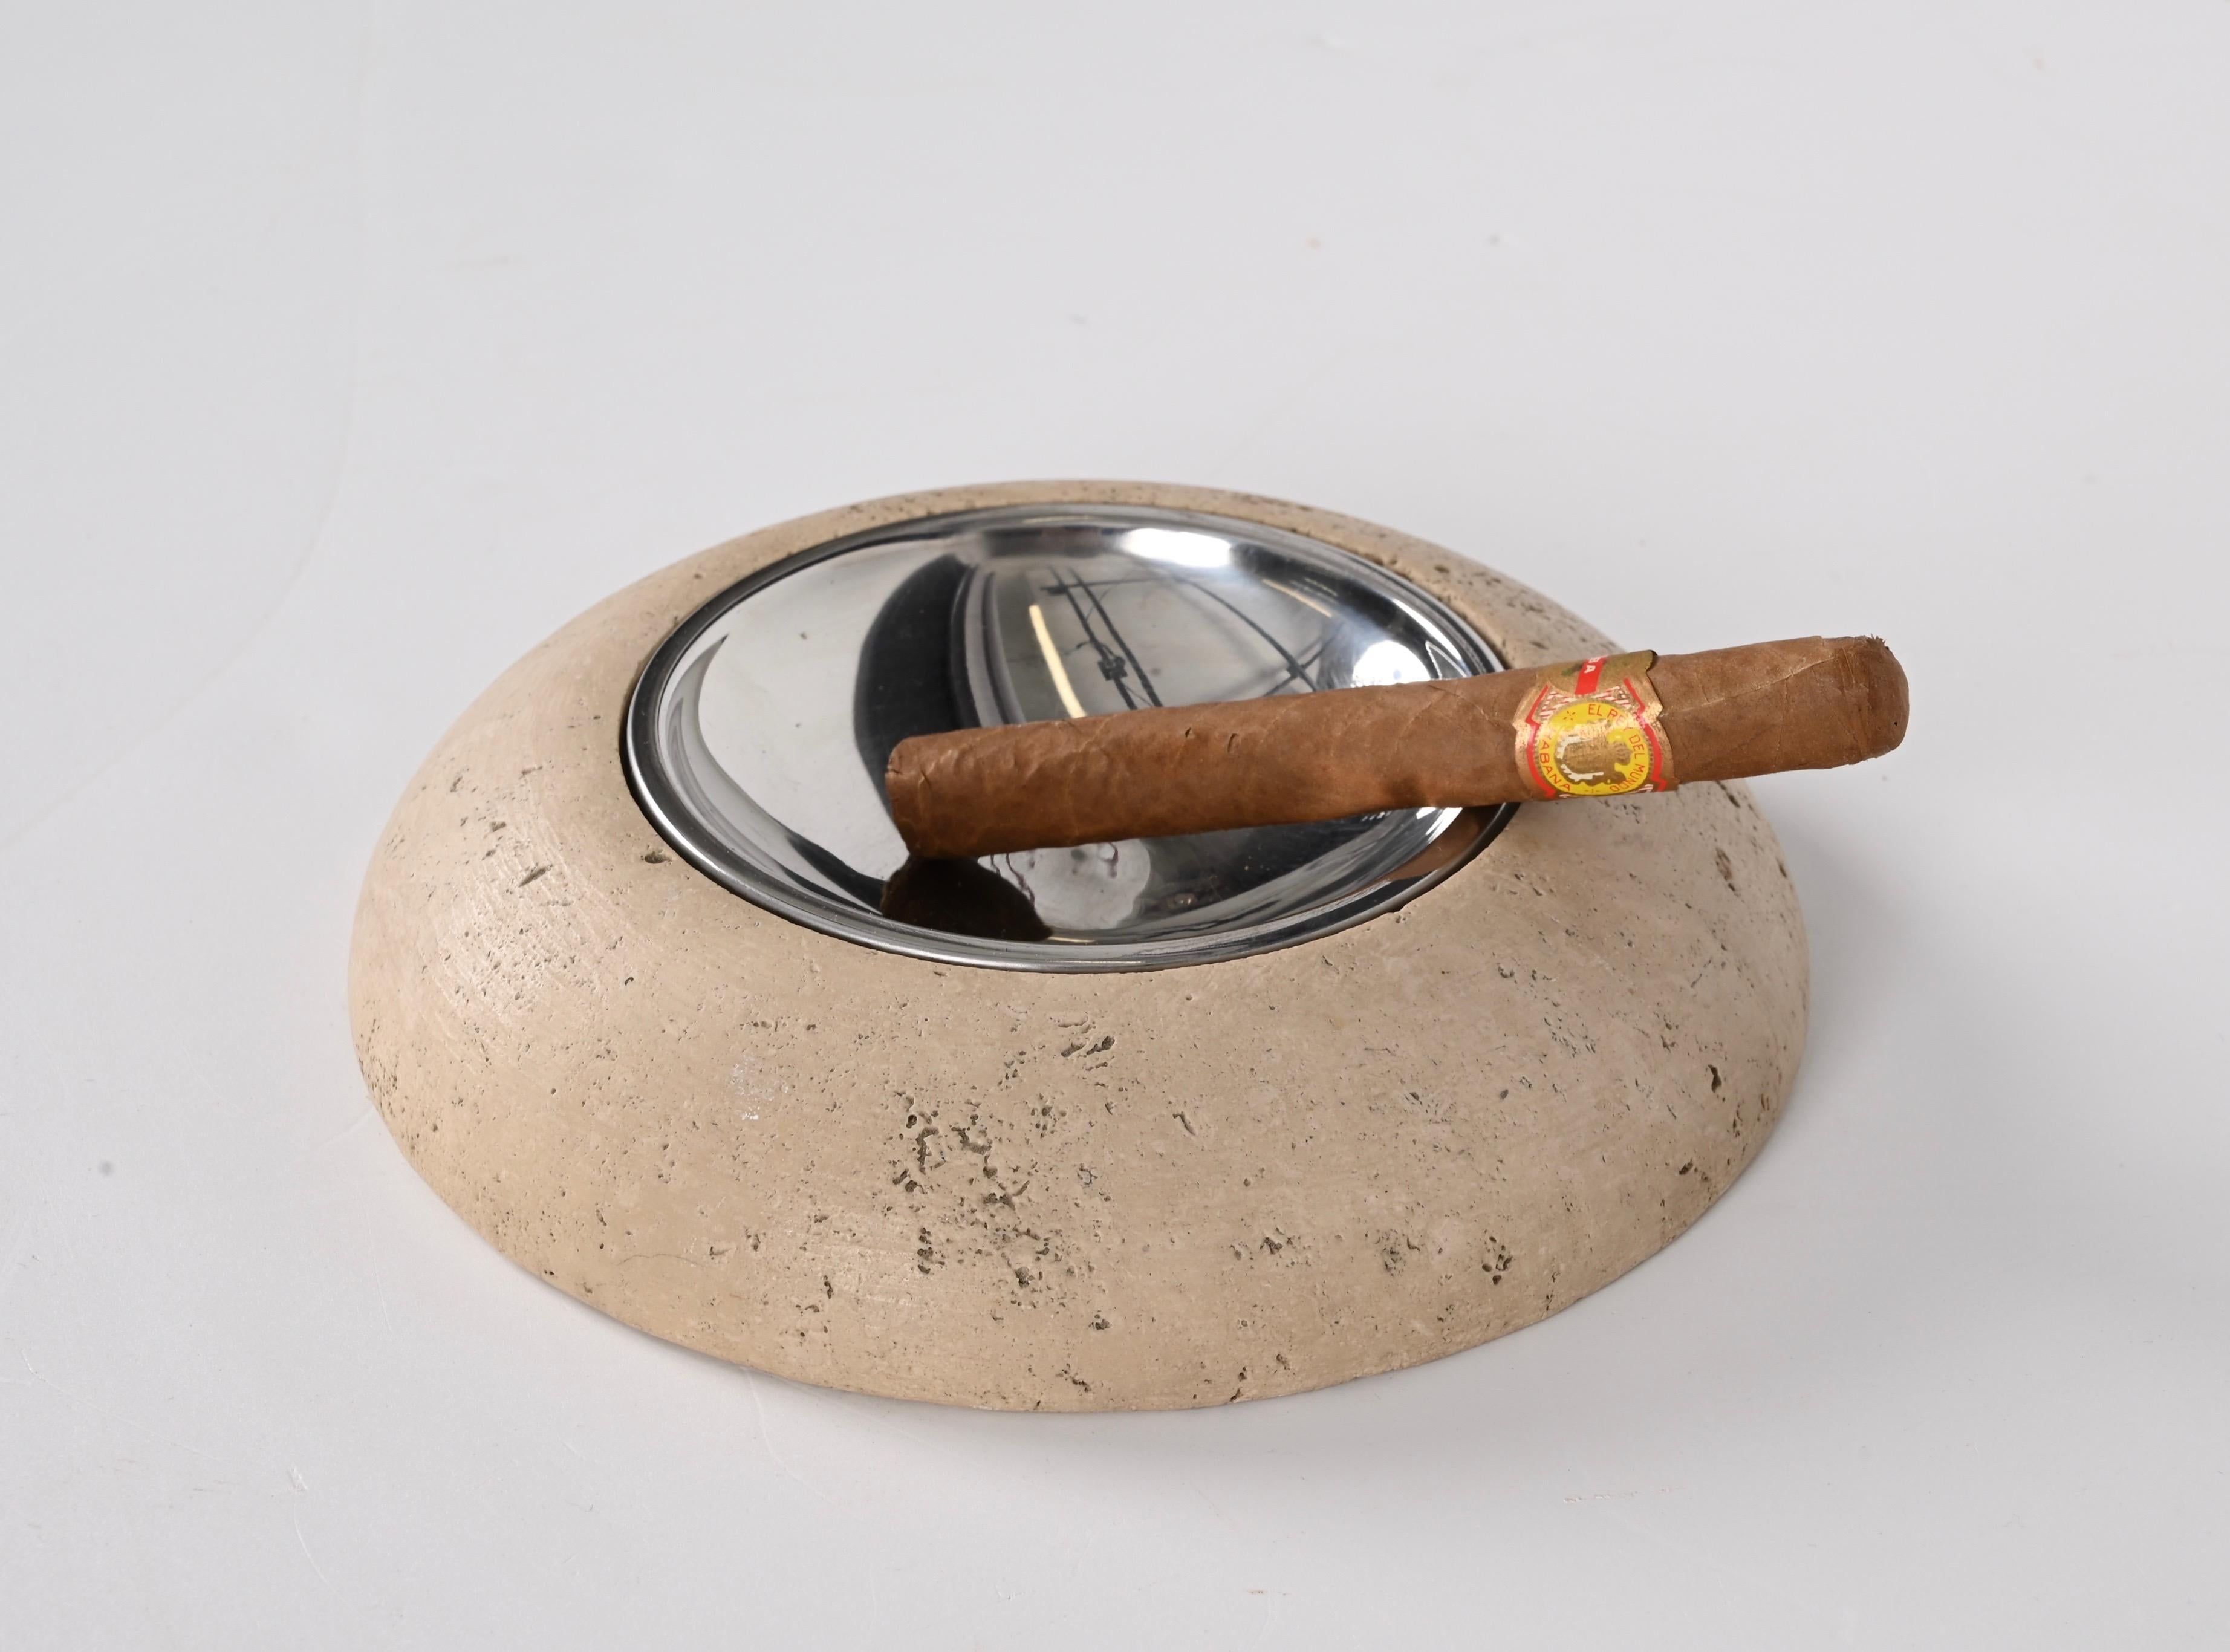 Midcentury Round Ashtray White Travertine Marble and Steel, Mannelli Italy 1970s For Sale 10